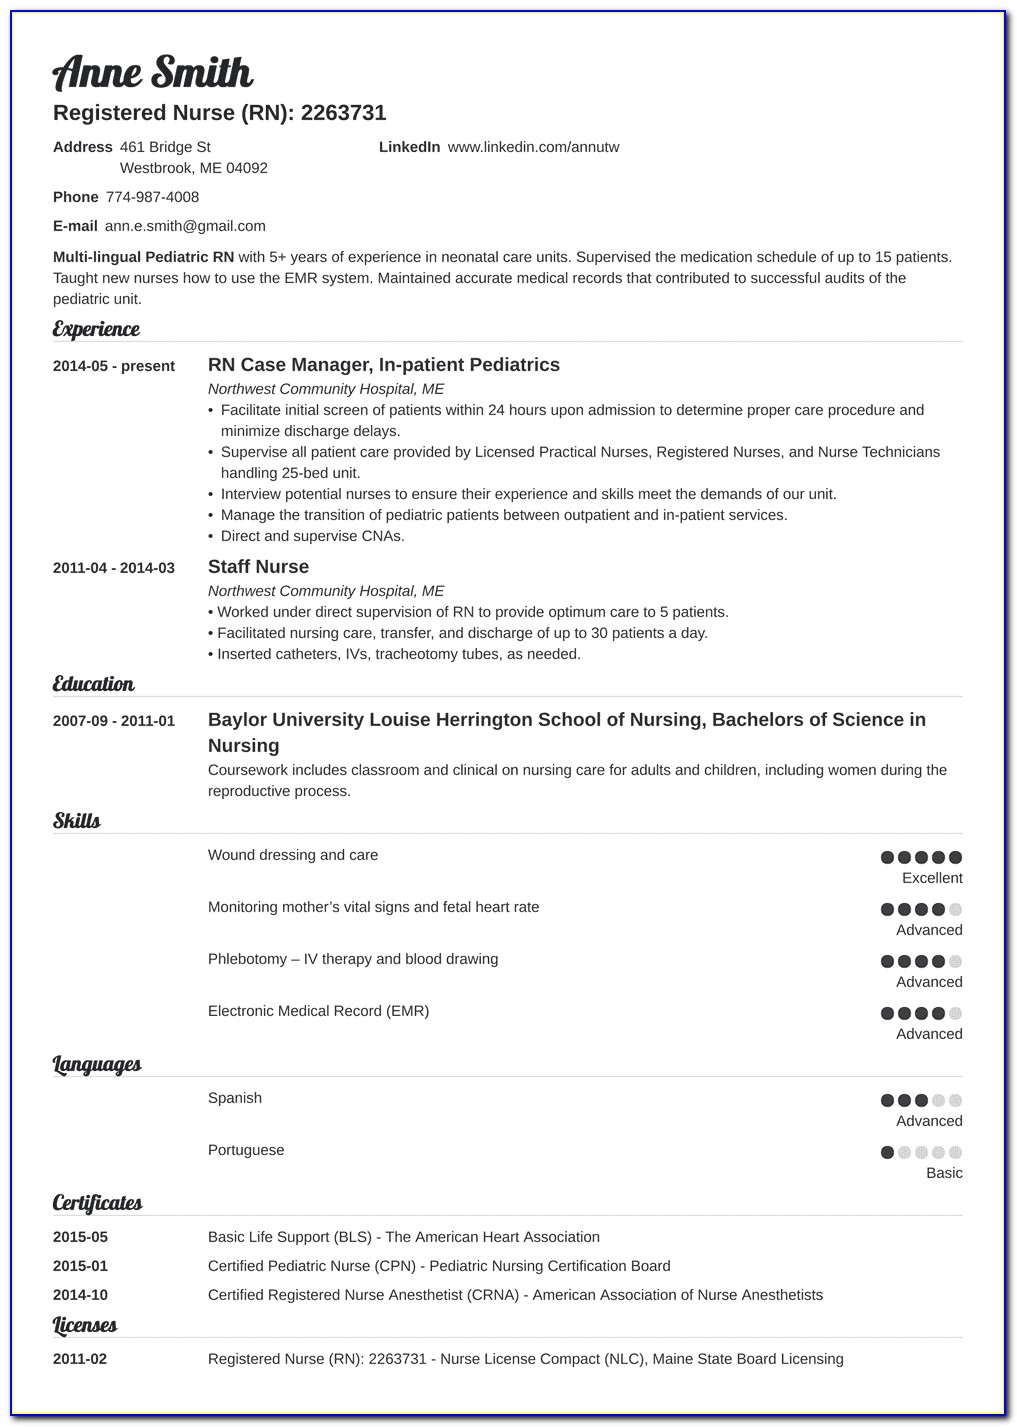 Sample Resume For New Registered Nurse With No Experience